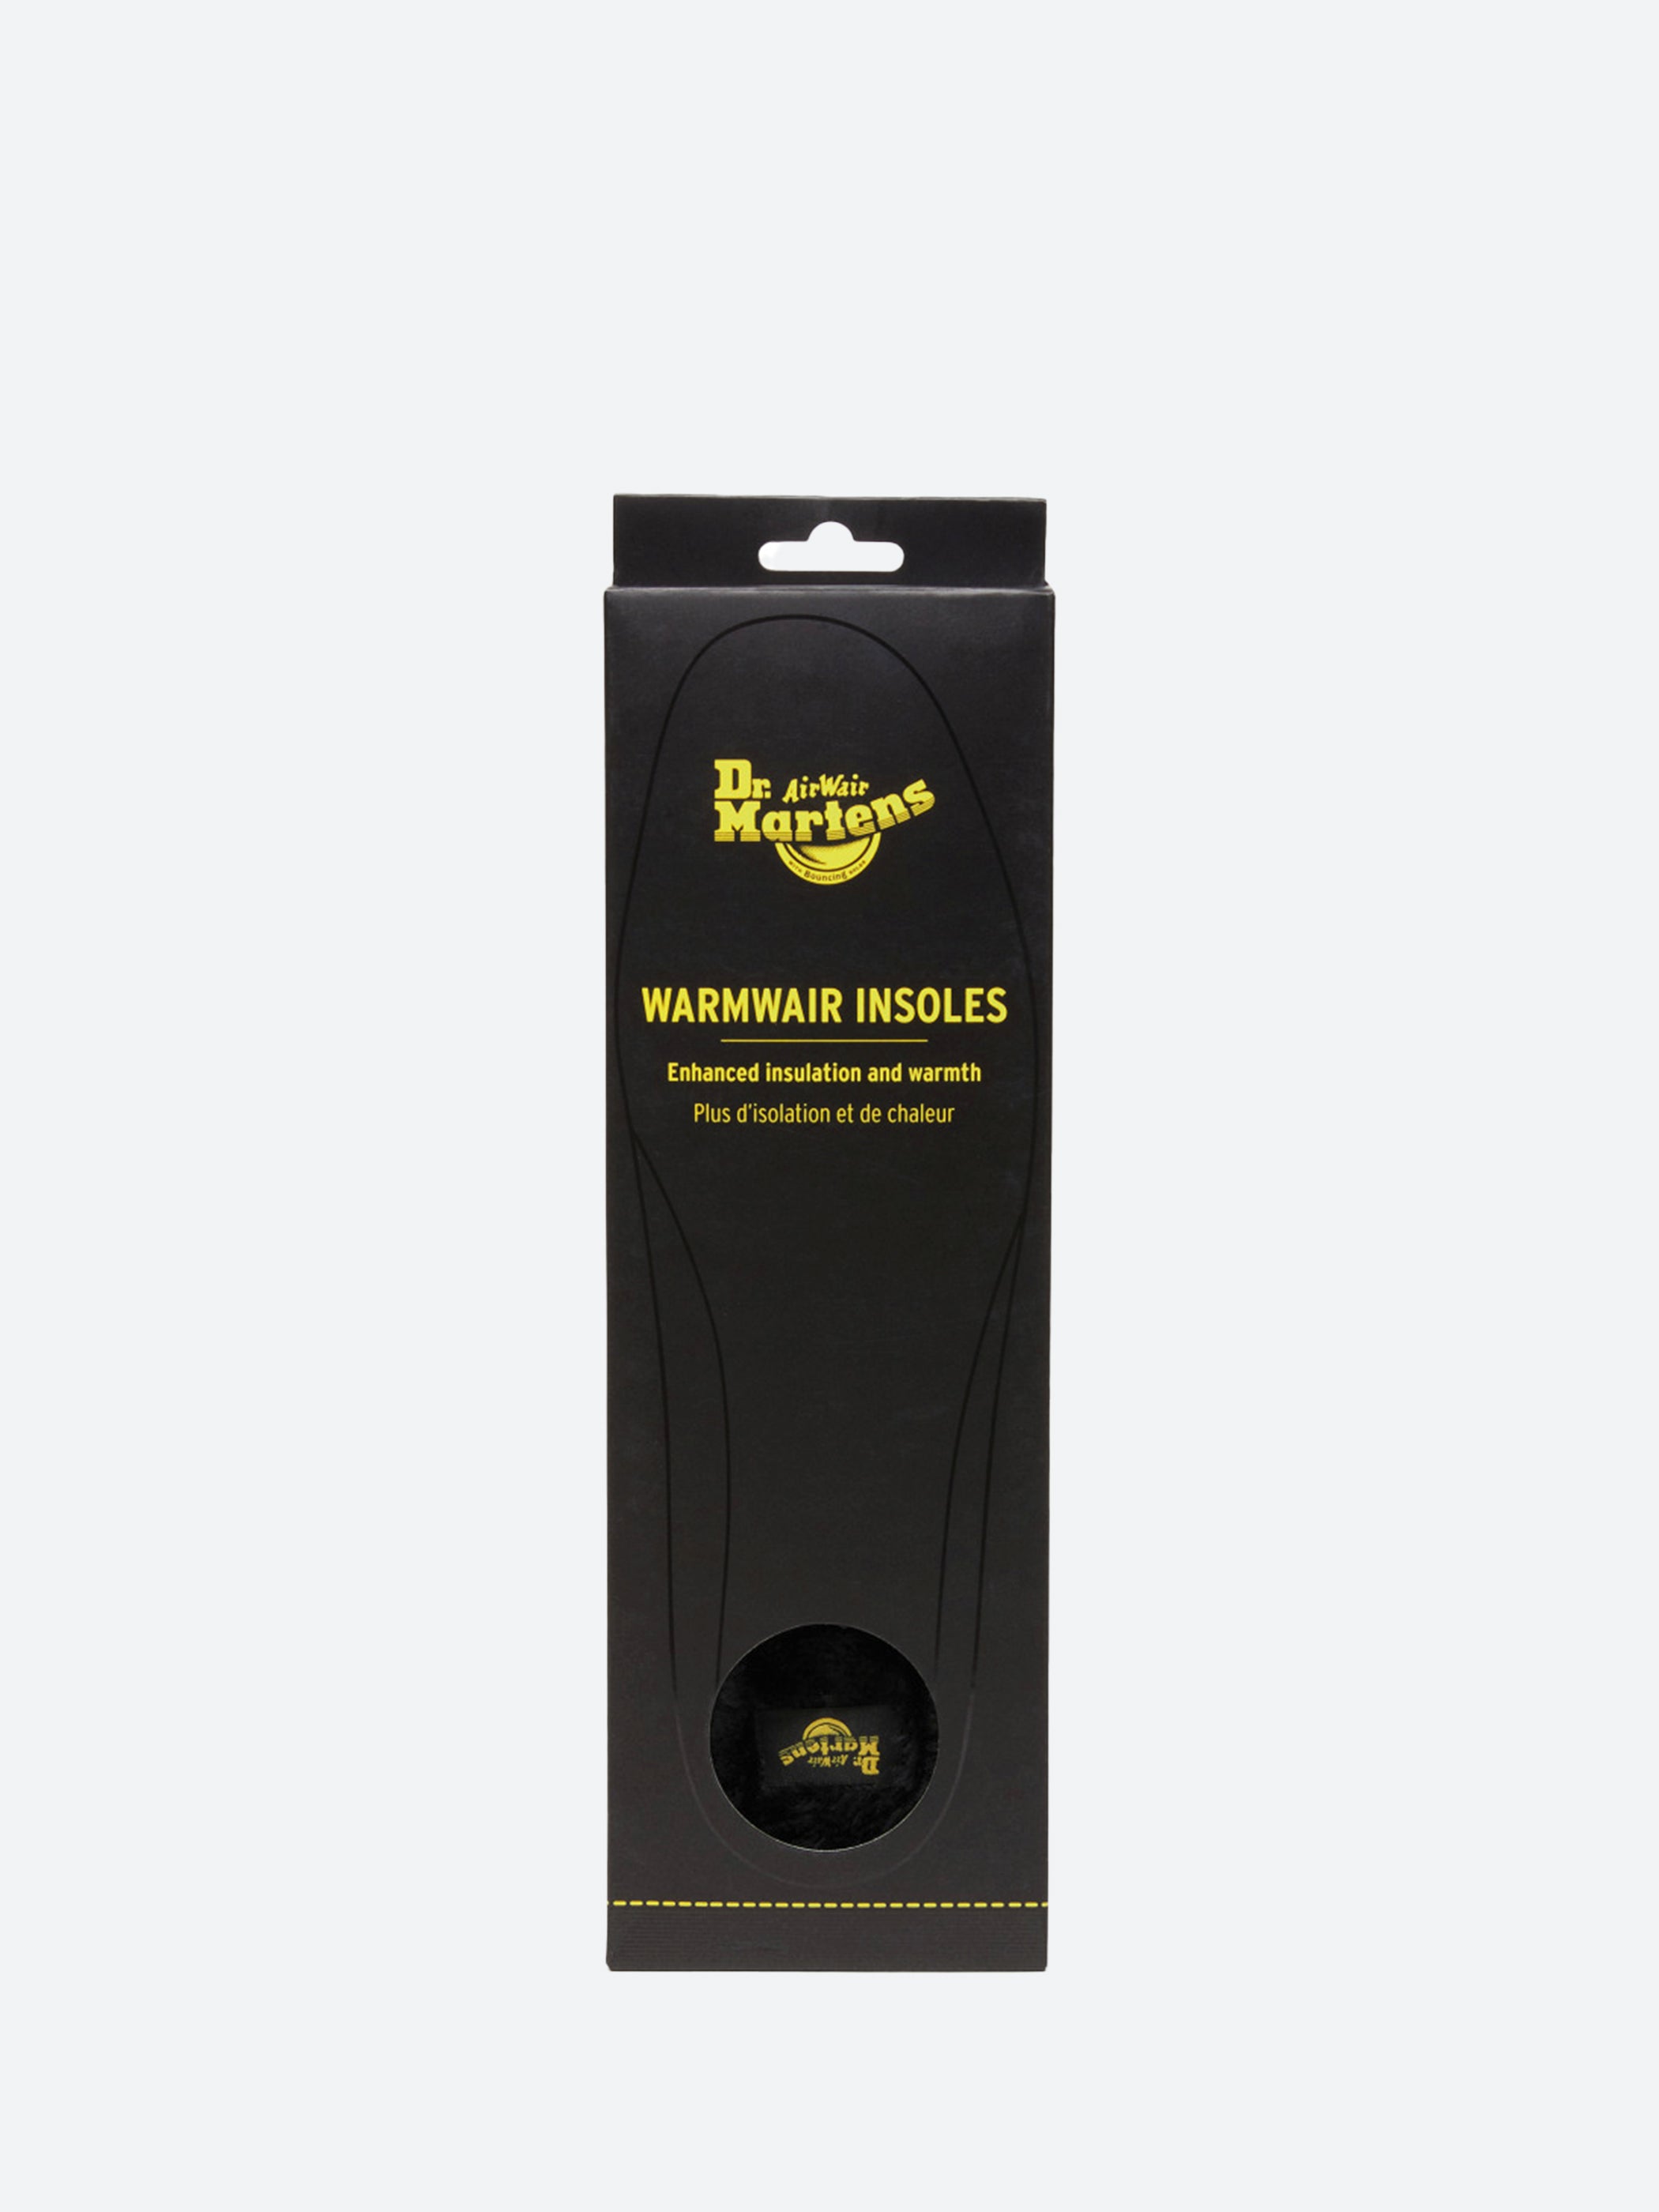 Warmwair Insoles